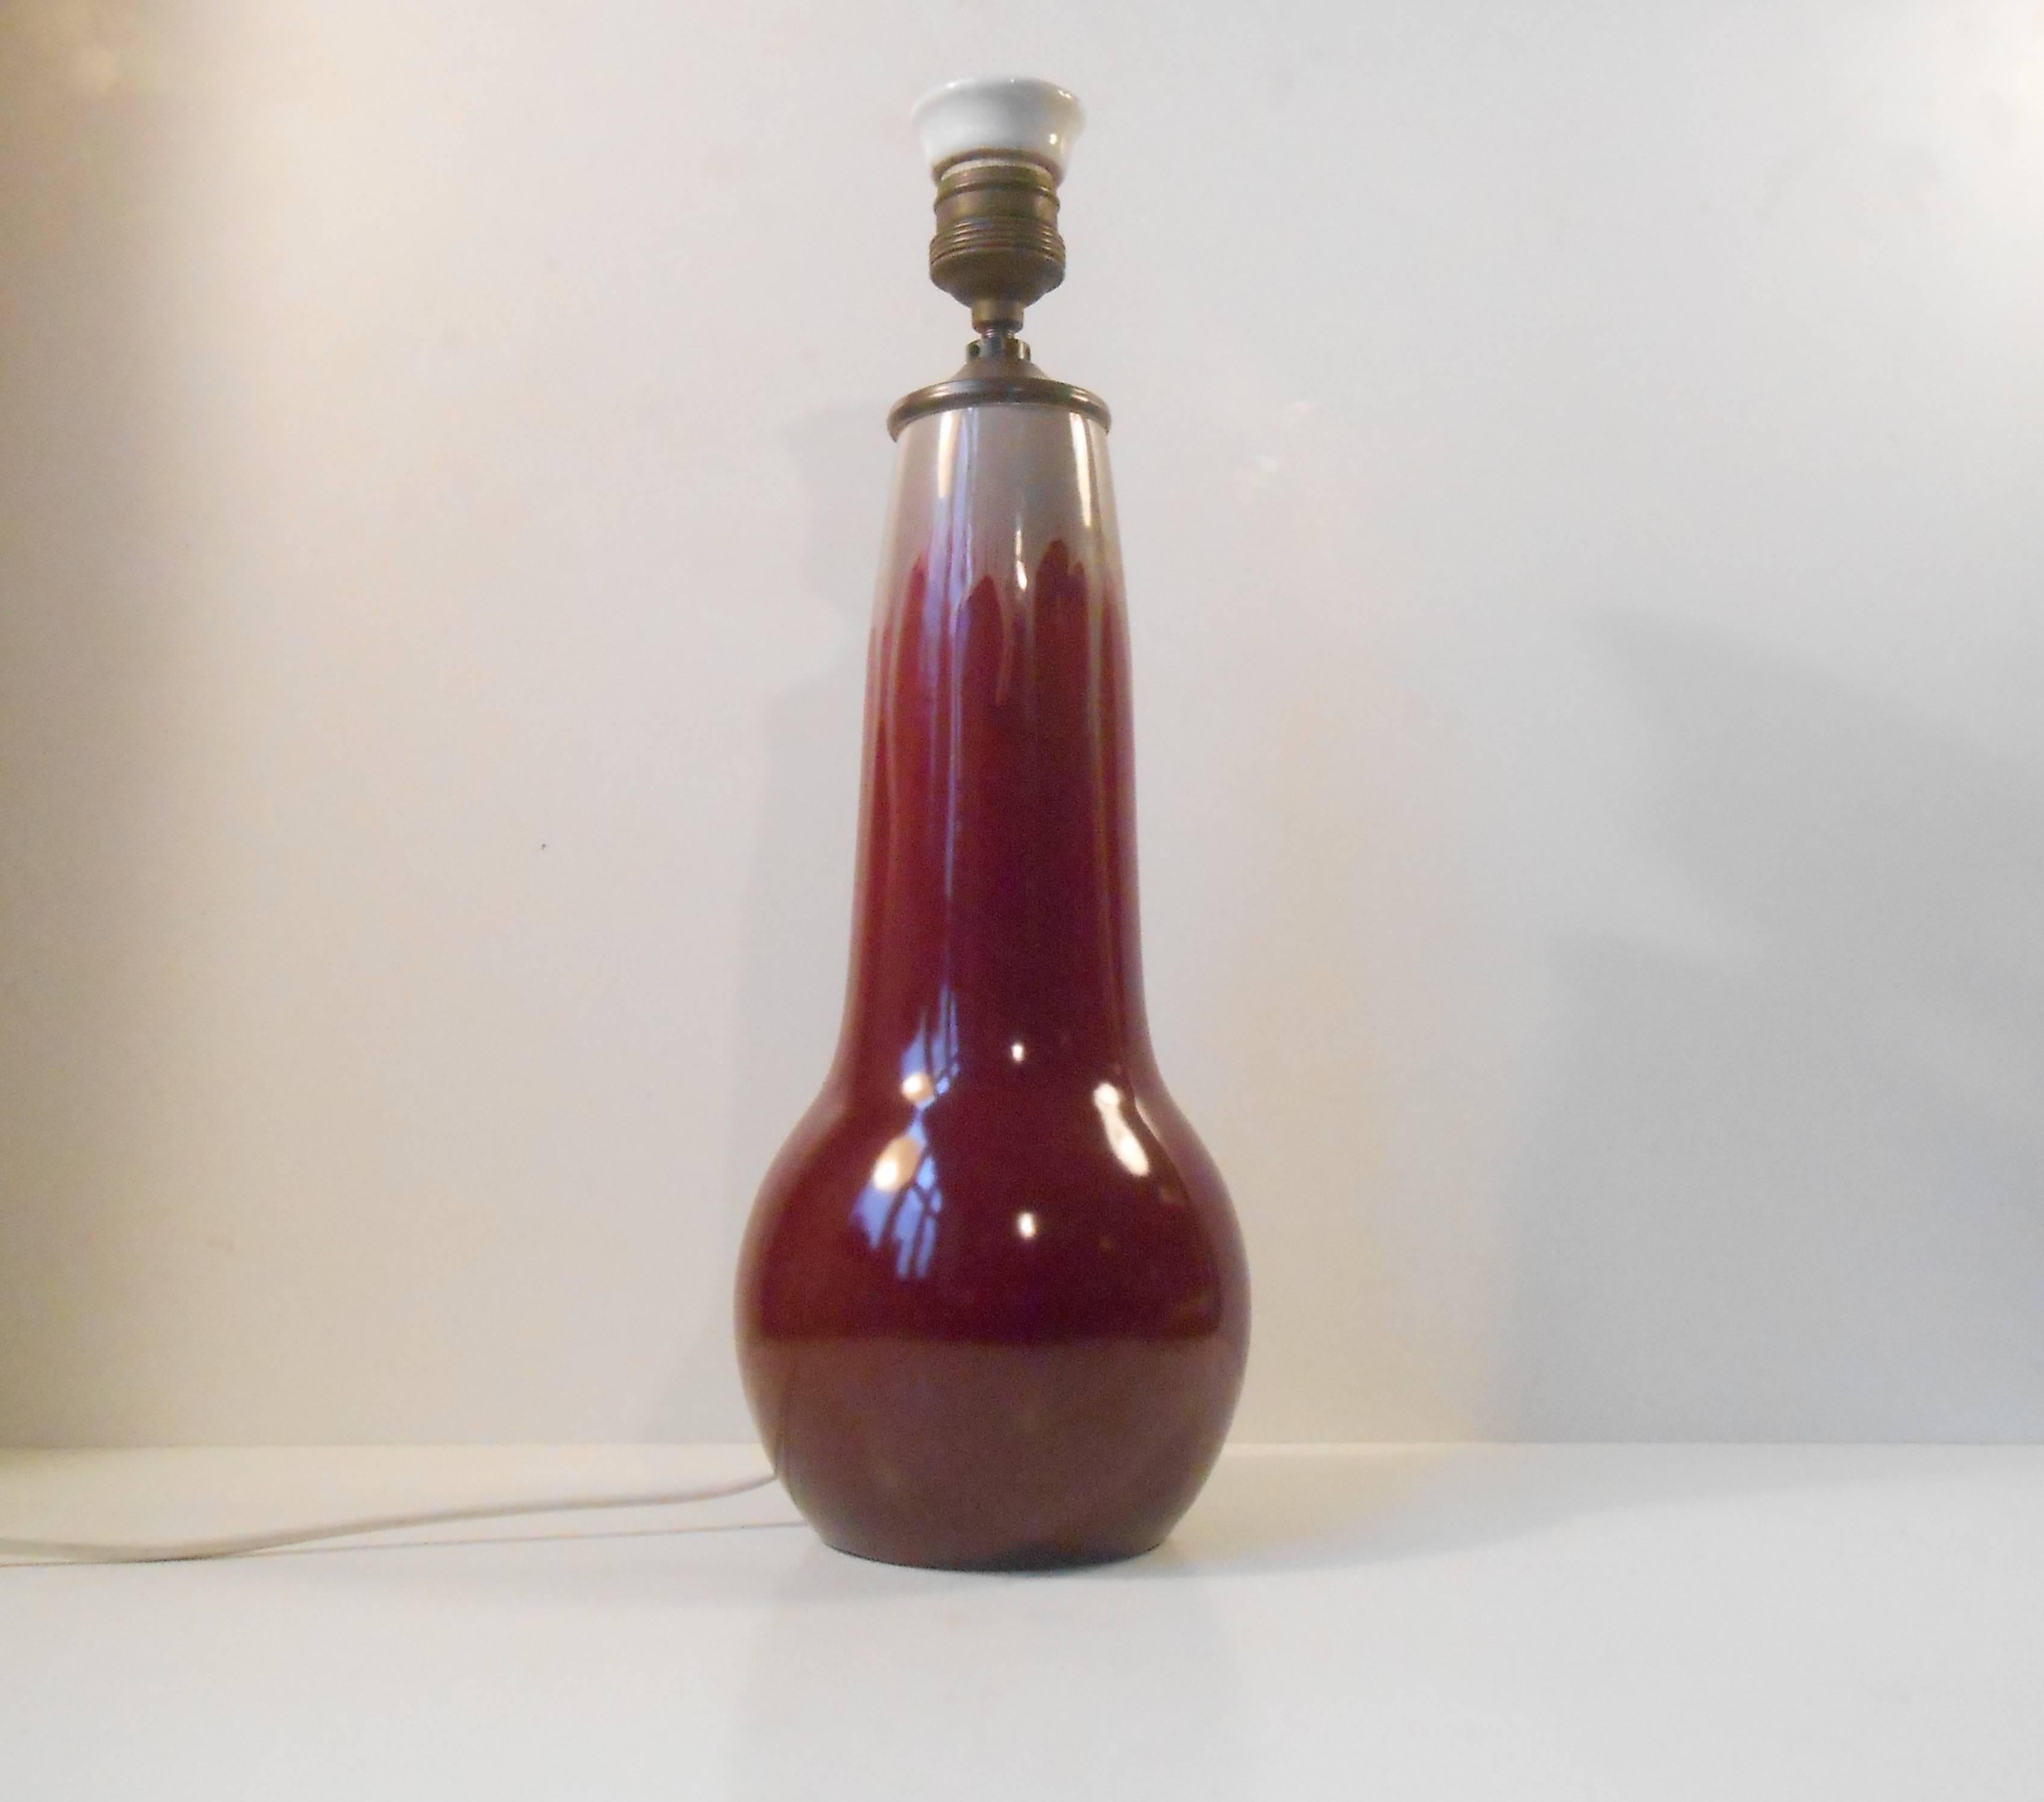 Michael Andersen Ceramic Art Nouveau Table Lamp with Oxblood Glaze In Good Condition For Sale In Esbjerg, DK